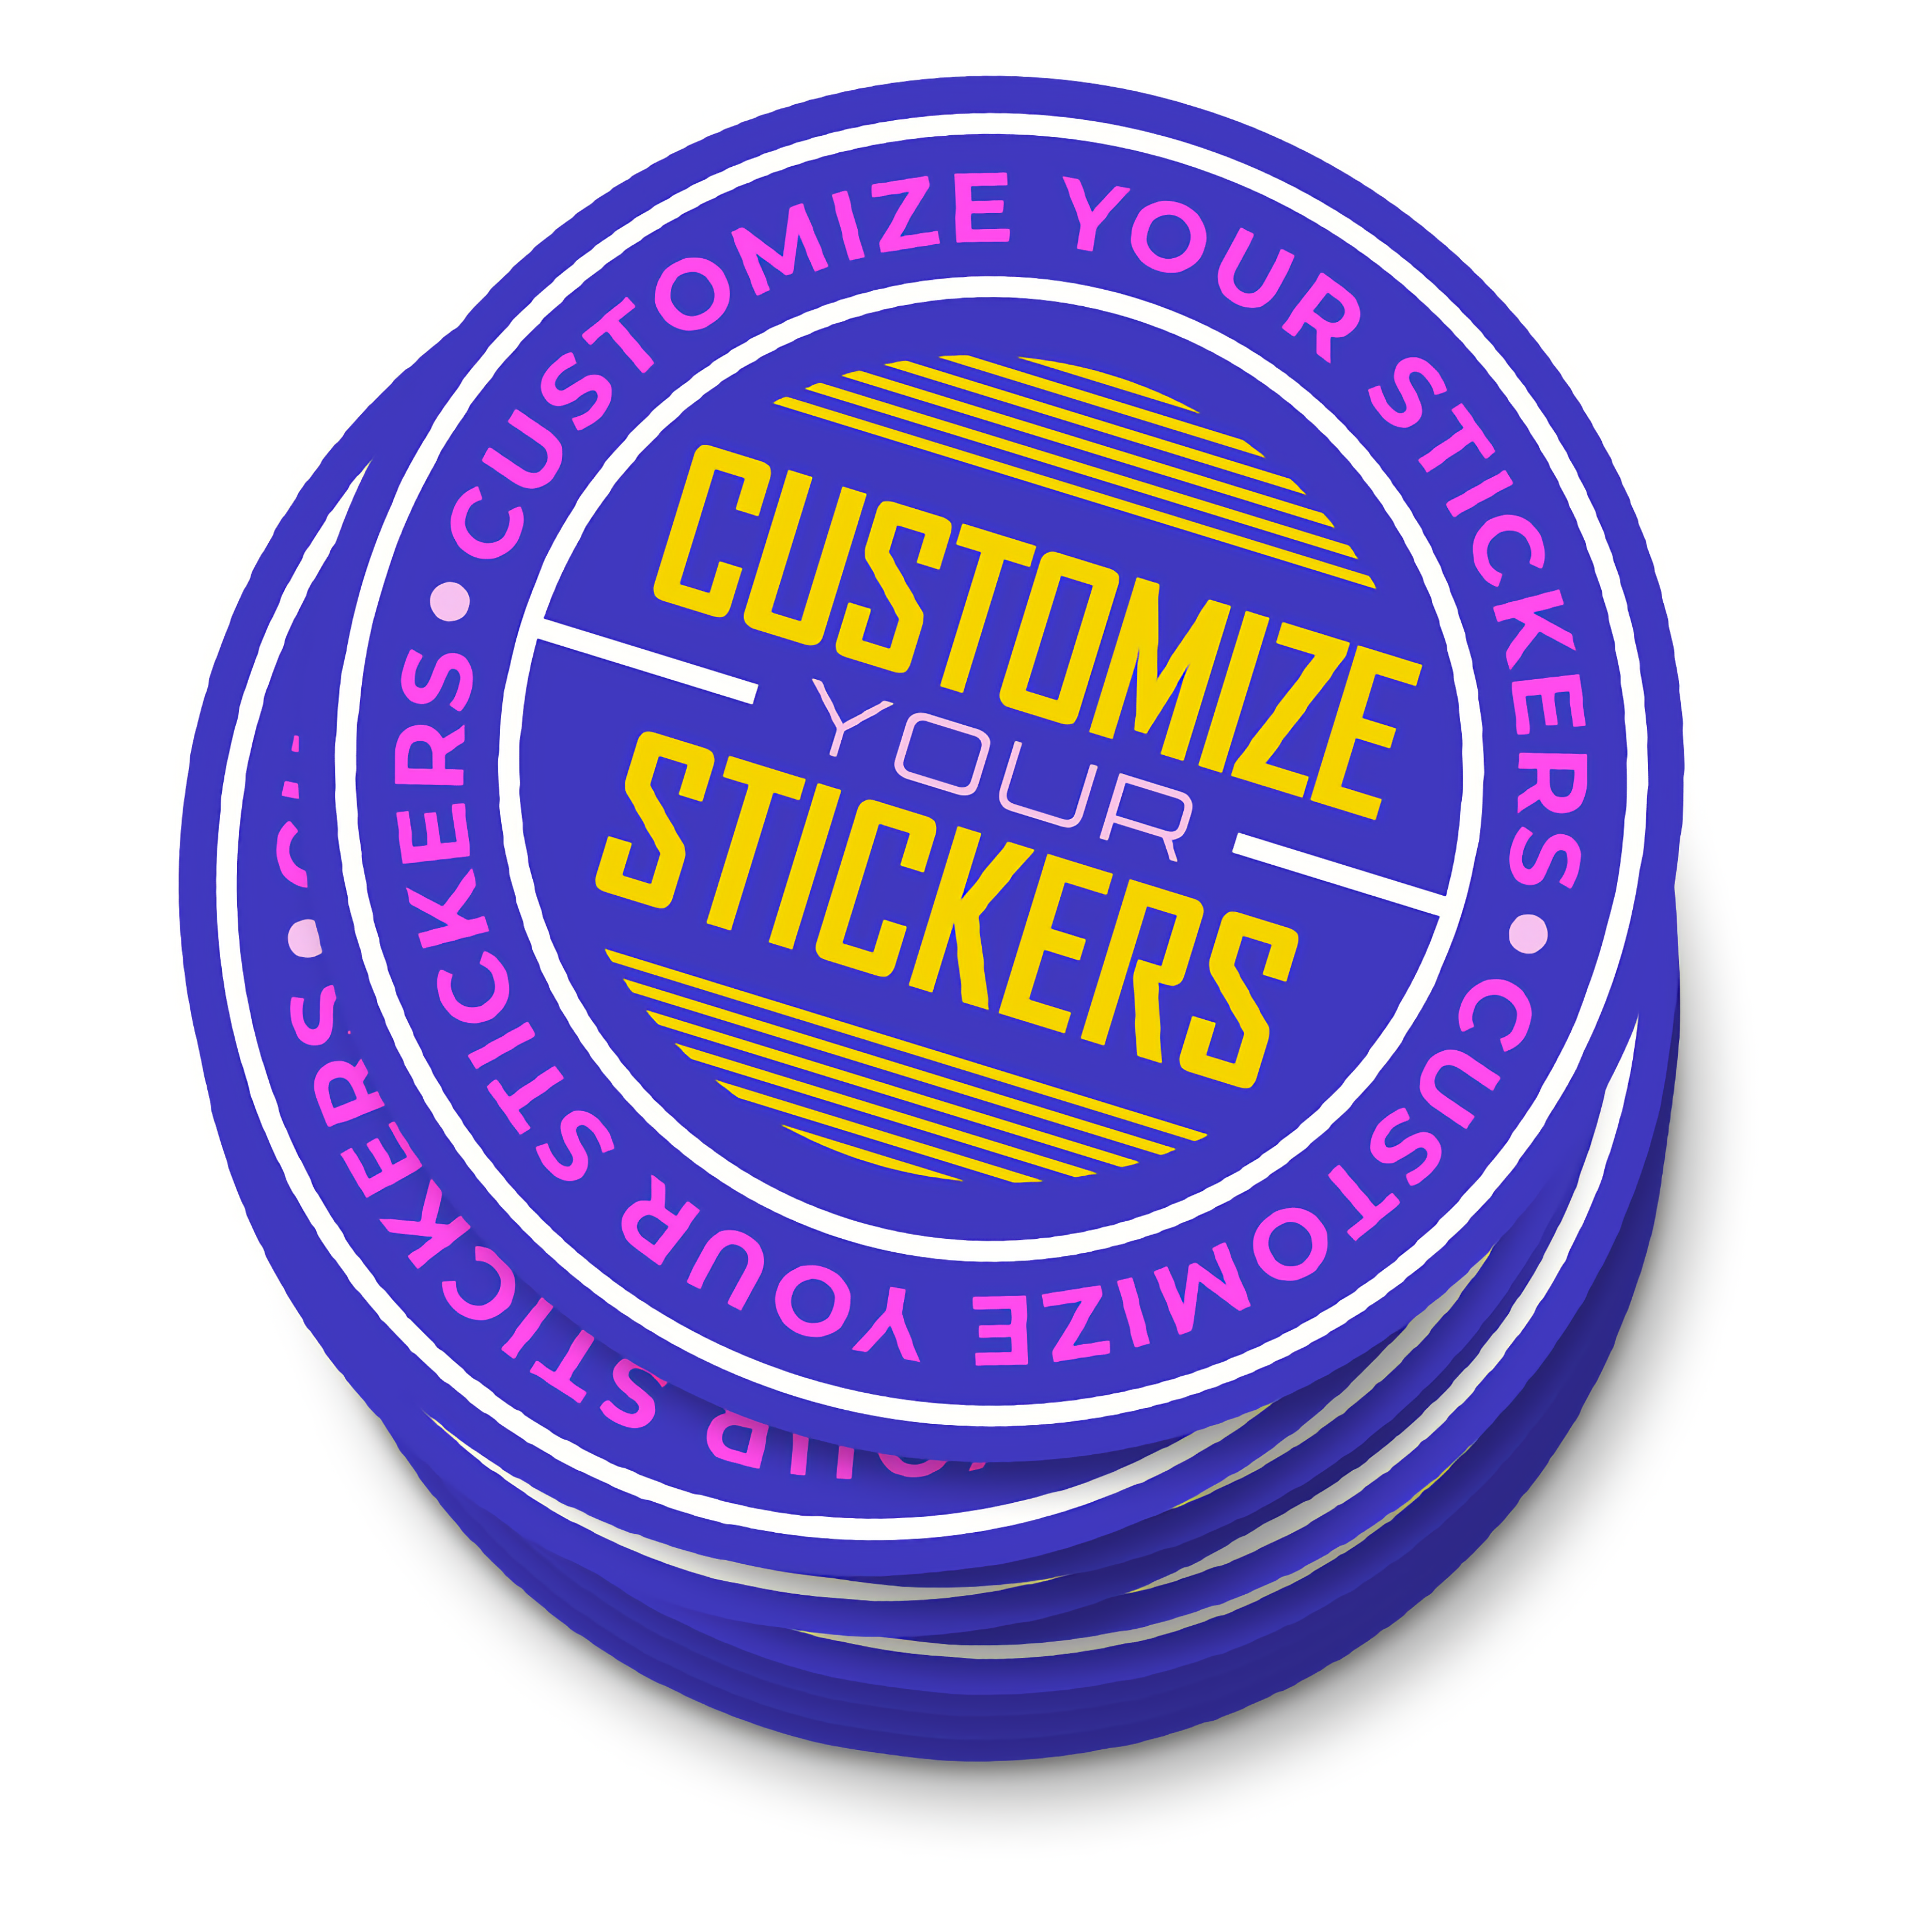 Custom Stickers, Make Your Own Stickers